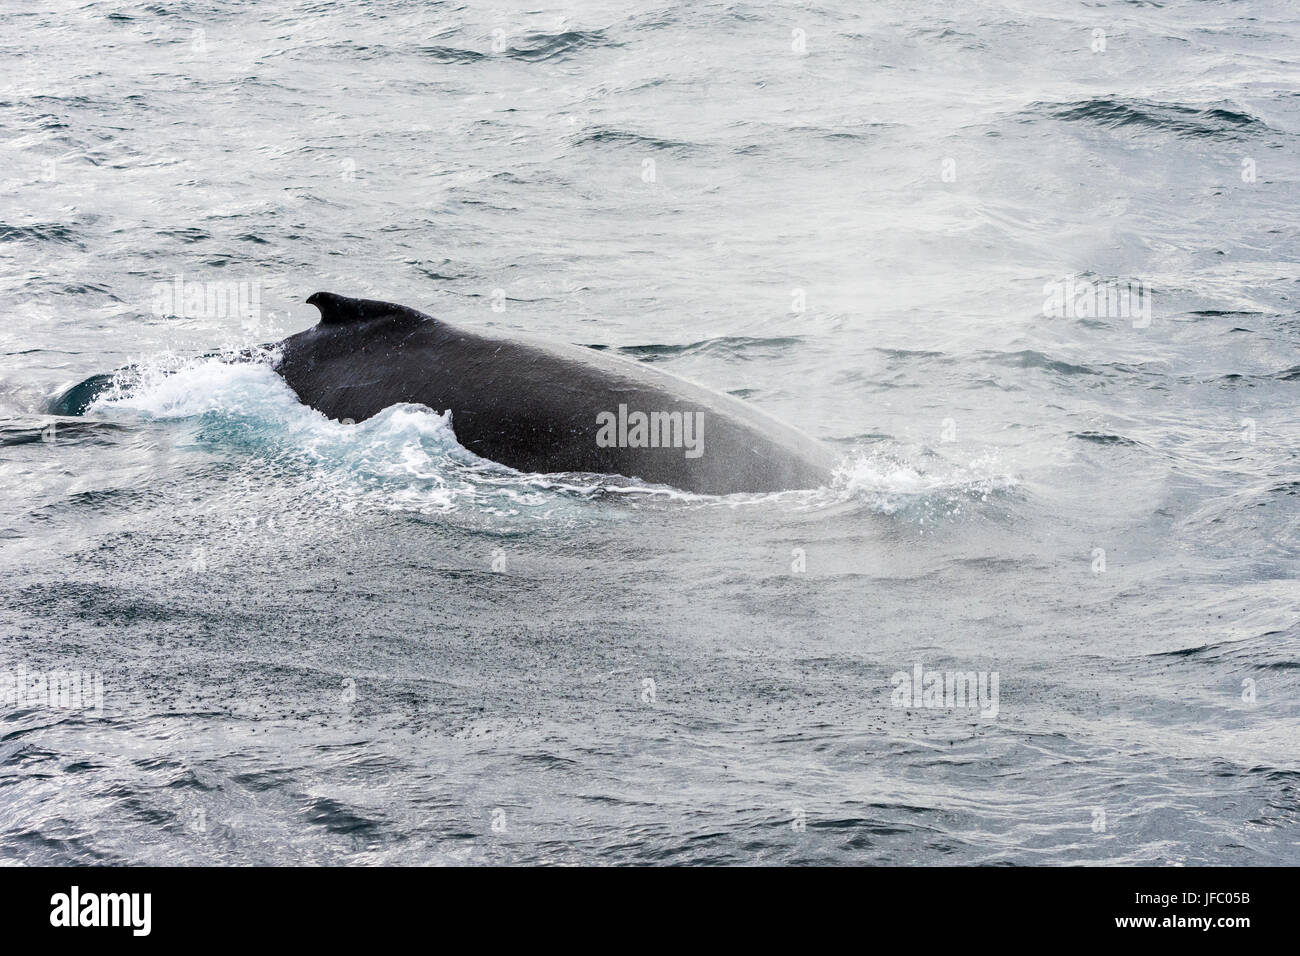 Spray from the blowhole of a migrating humpback whale in Flinders Bay, off the coast of Augusta, Western Australia Stock Photo